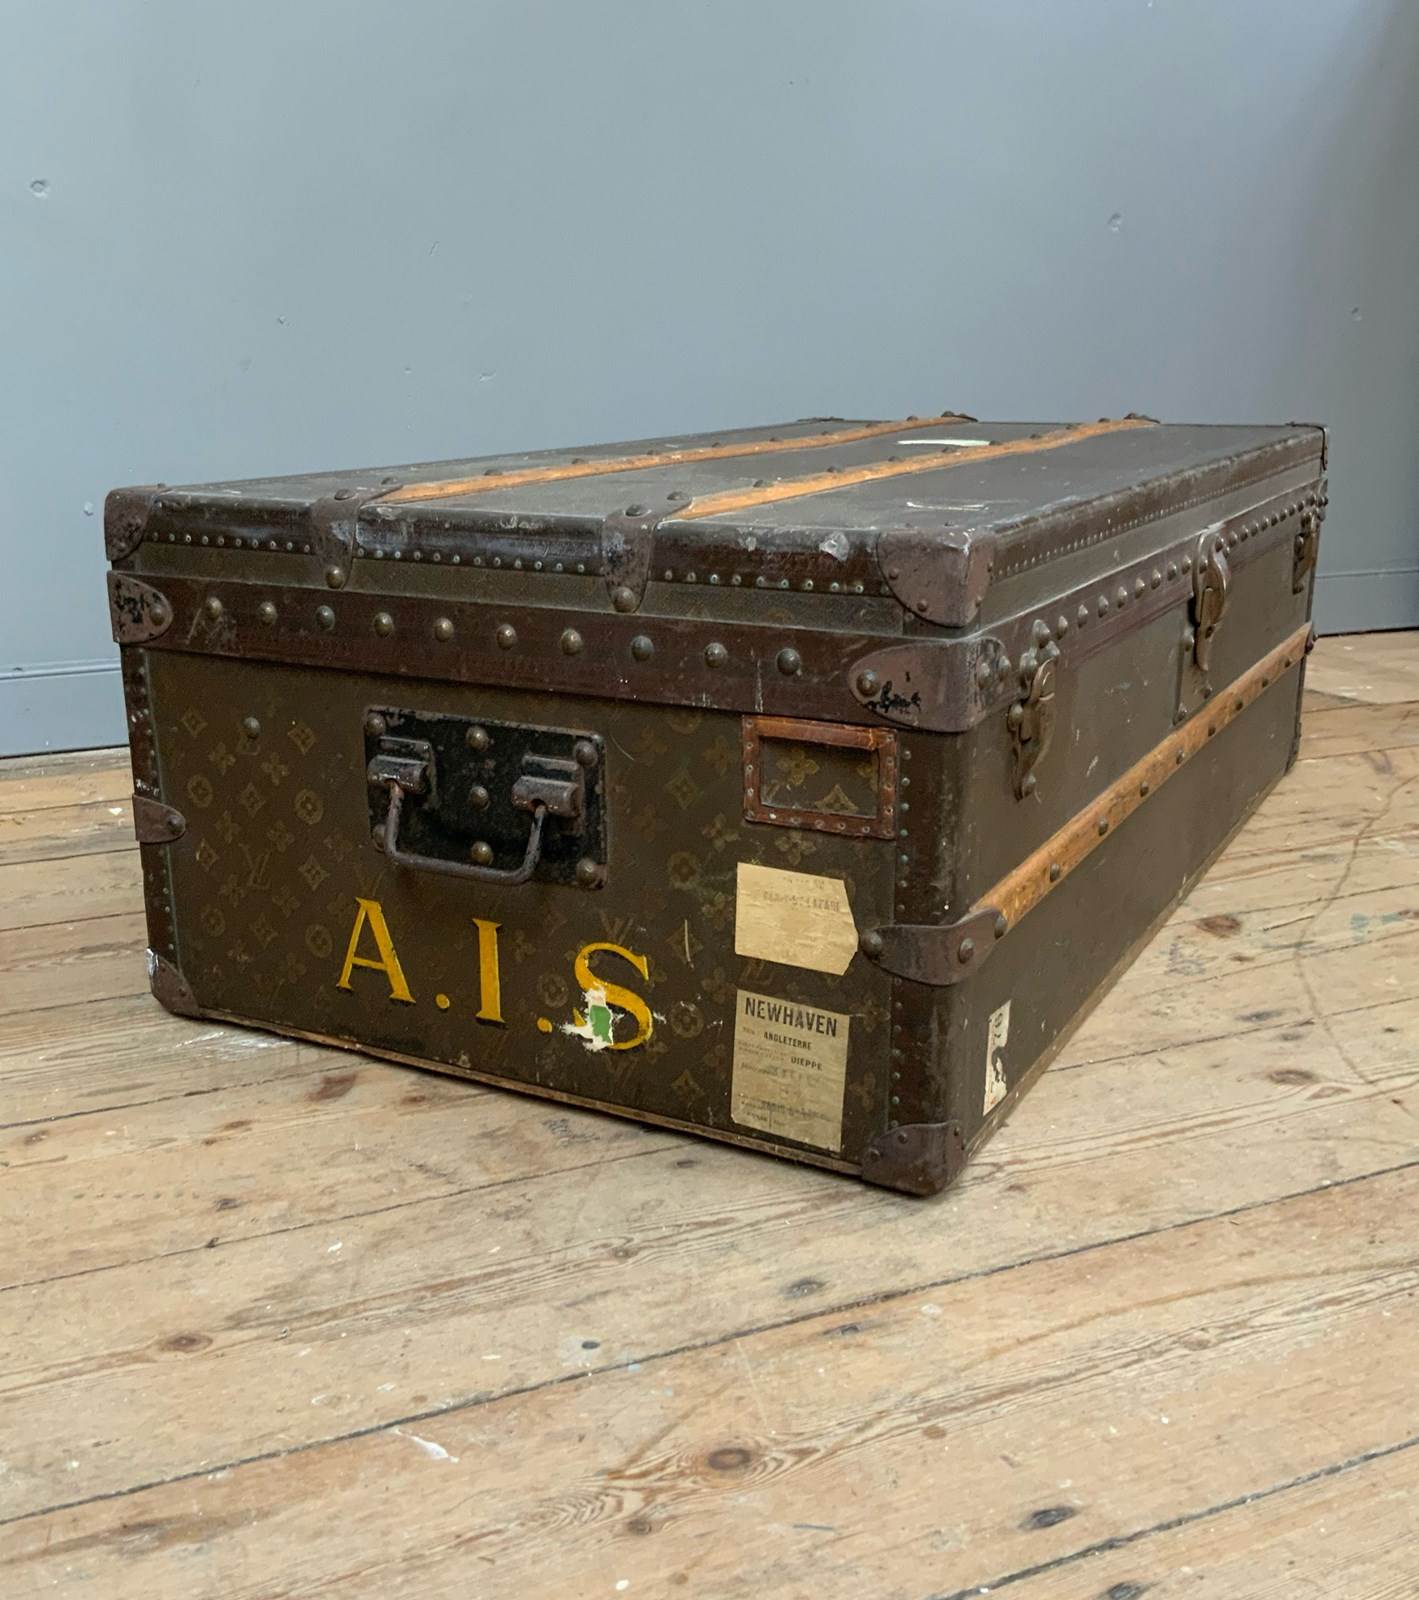 Louis Vuitton Trunk Malle Cabine, 1898 at 1stDibs